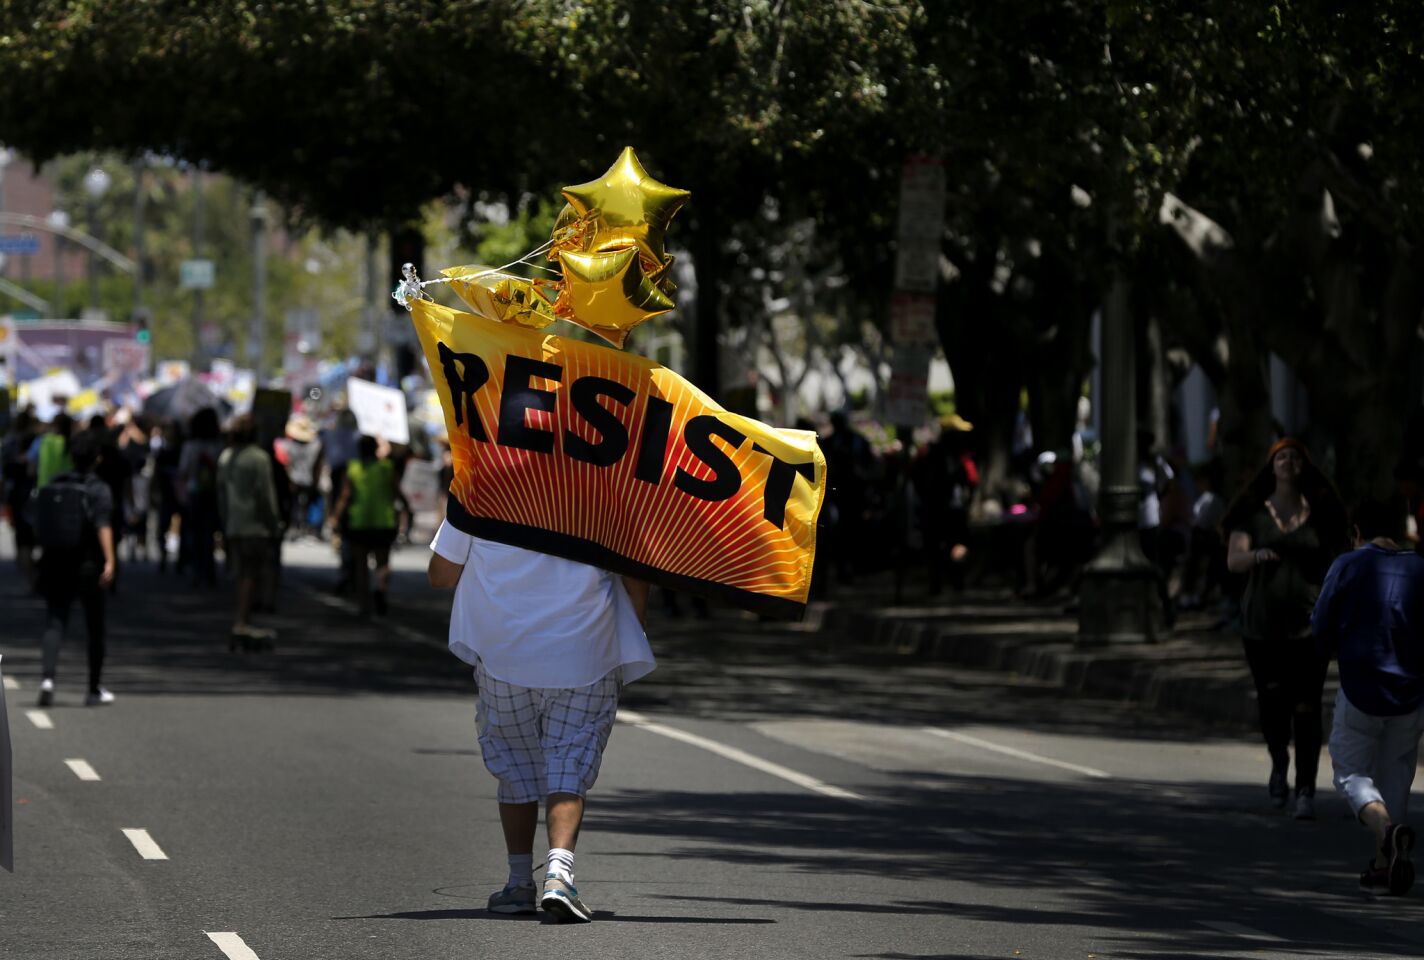 A protester carries a "Resist" banner toward the end of the impeachment march through downtown Los Angeles.